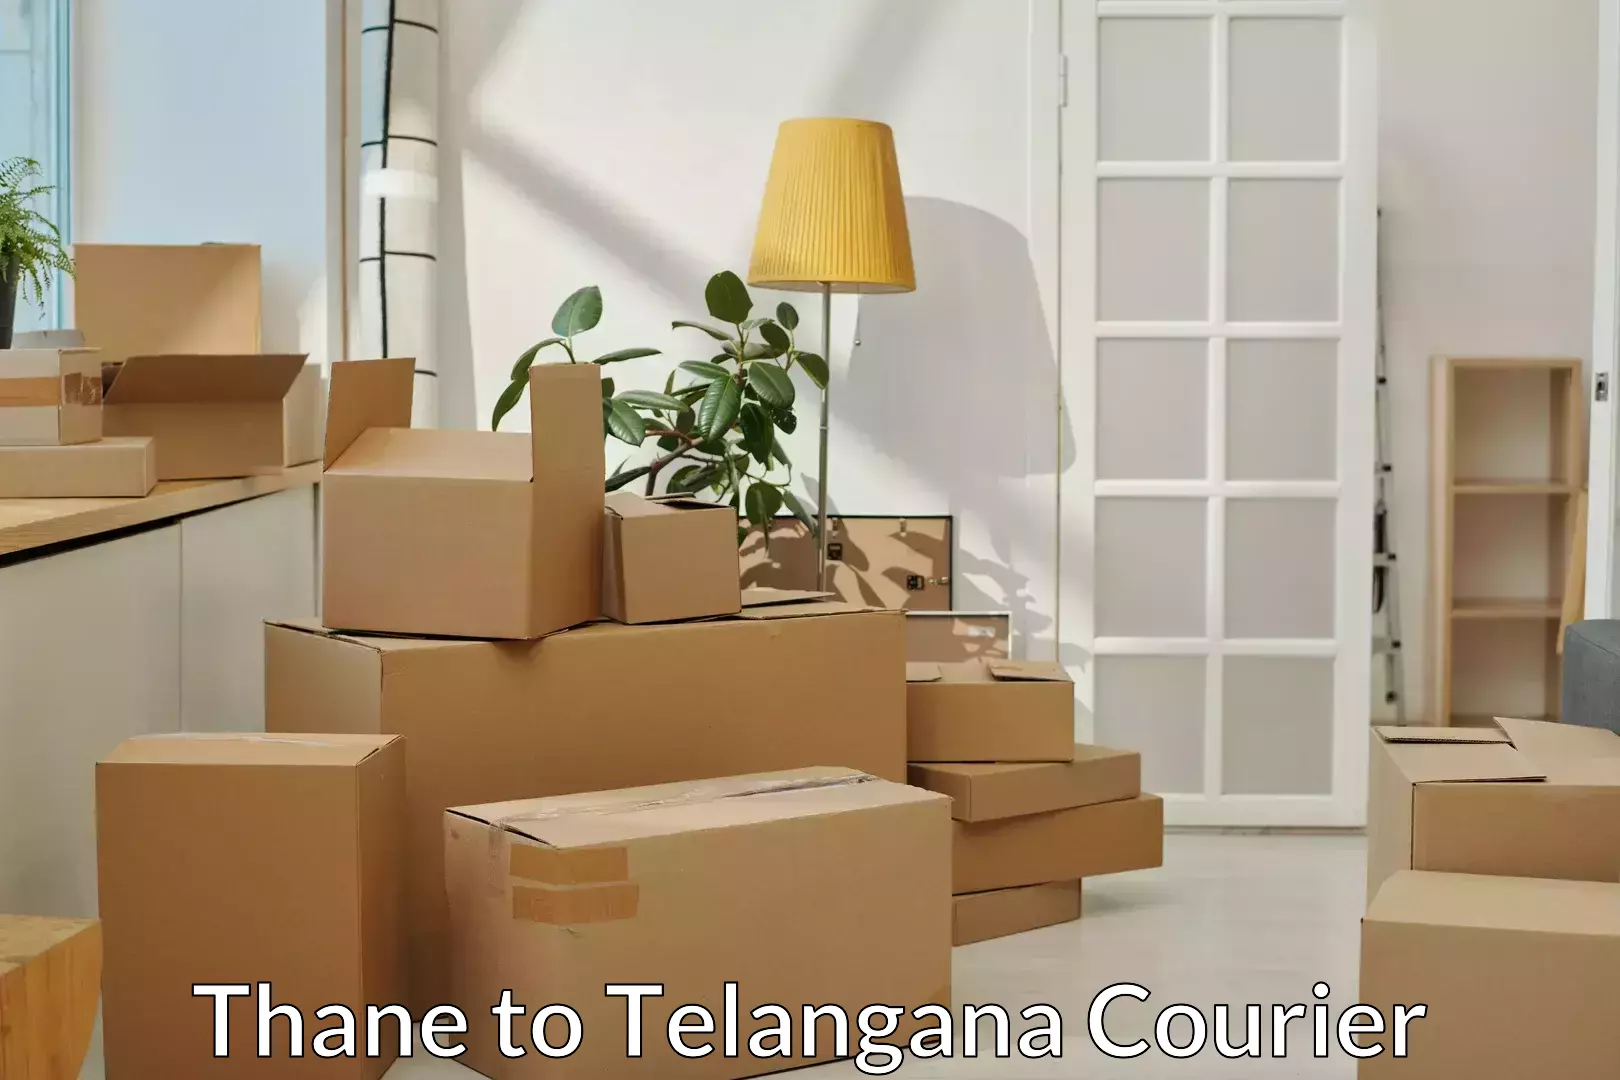 Furniture transport experts Thane to Sathupally